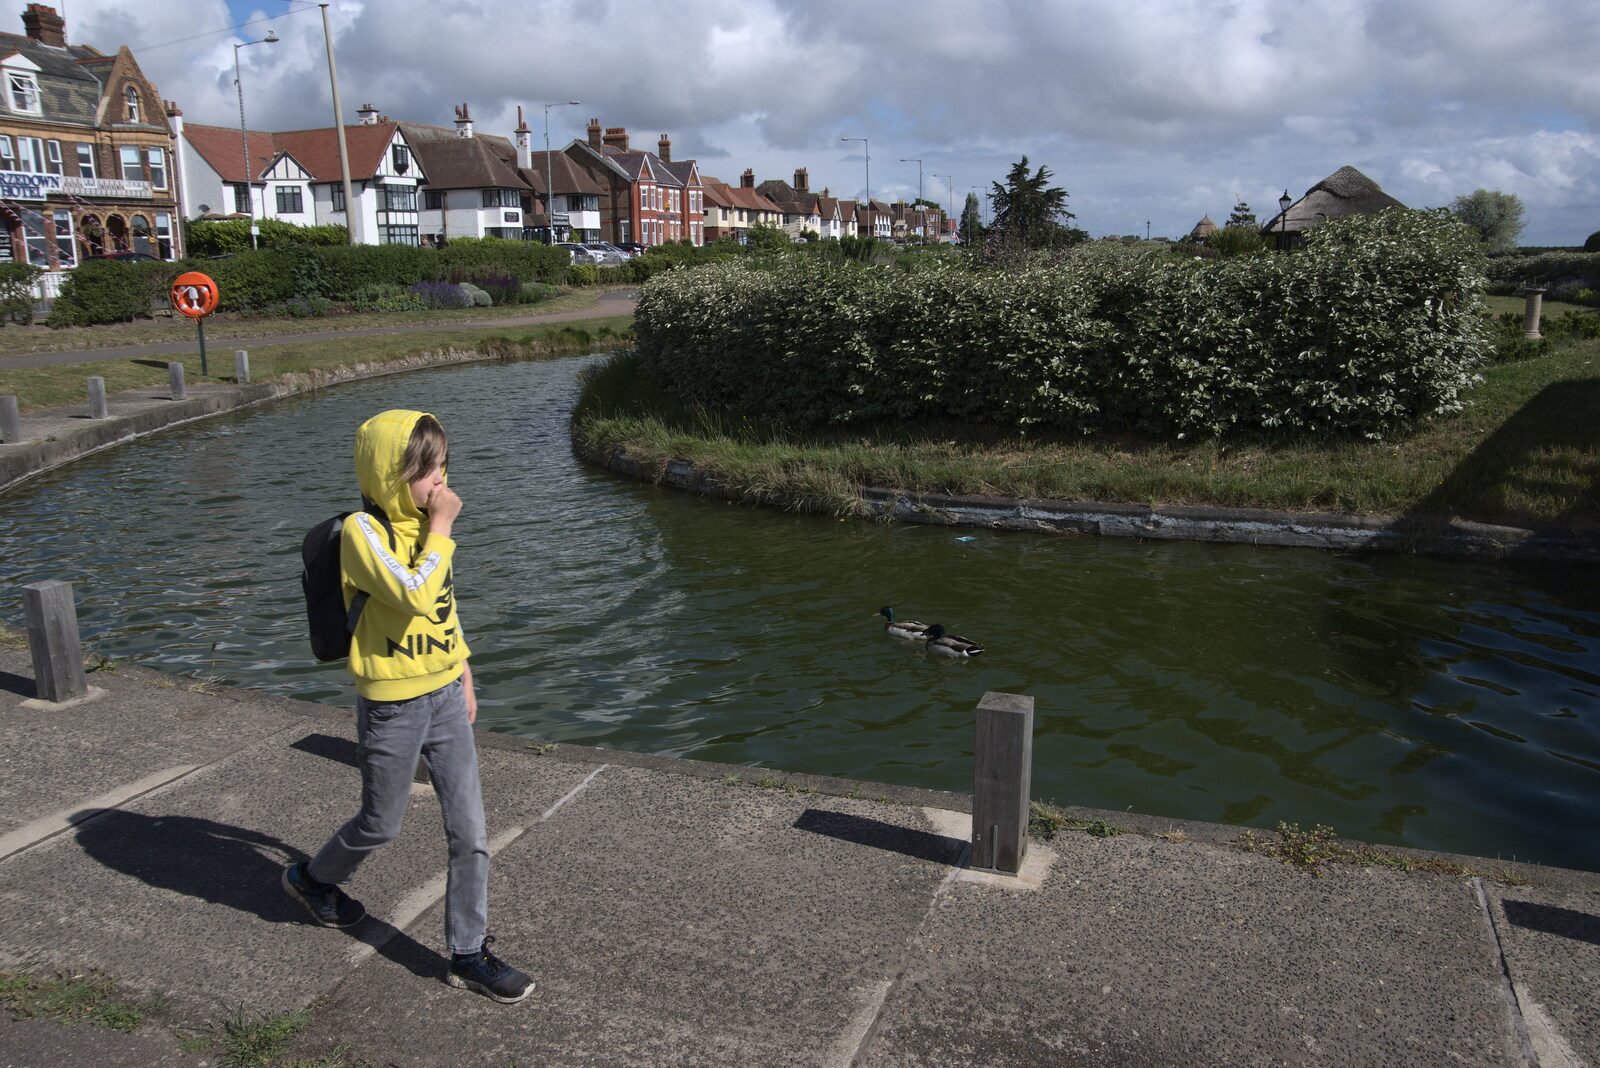 Harry roams around in the Venetian Waterways from Faded Seaside Glamour: A Weekend in Great Yarmouth, Norfolk - 29th May 2022